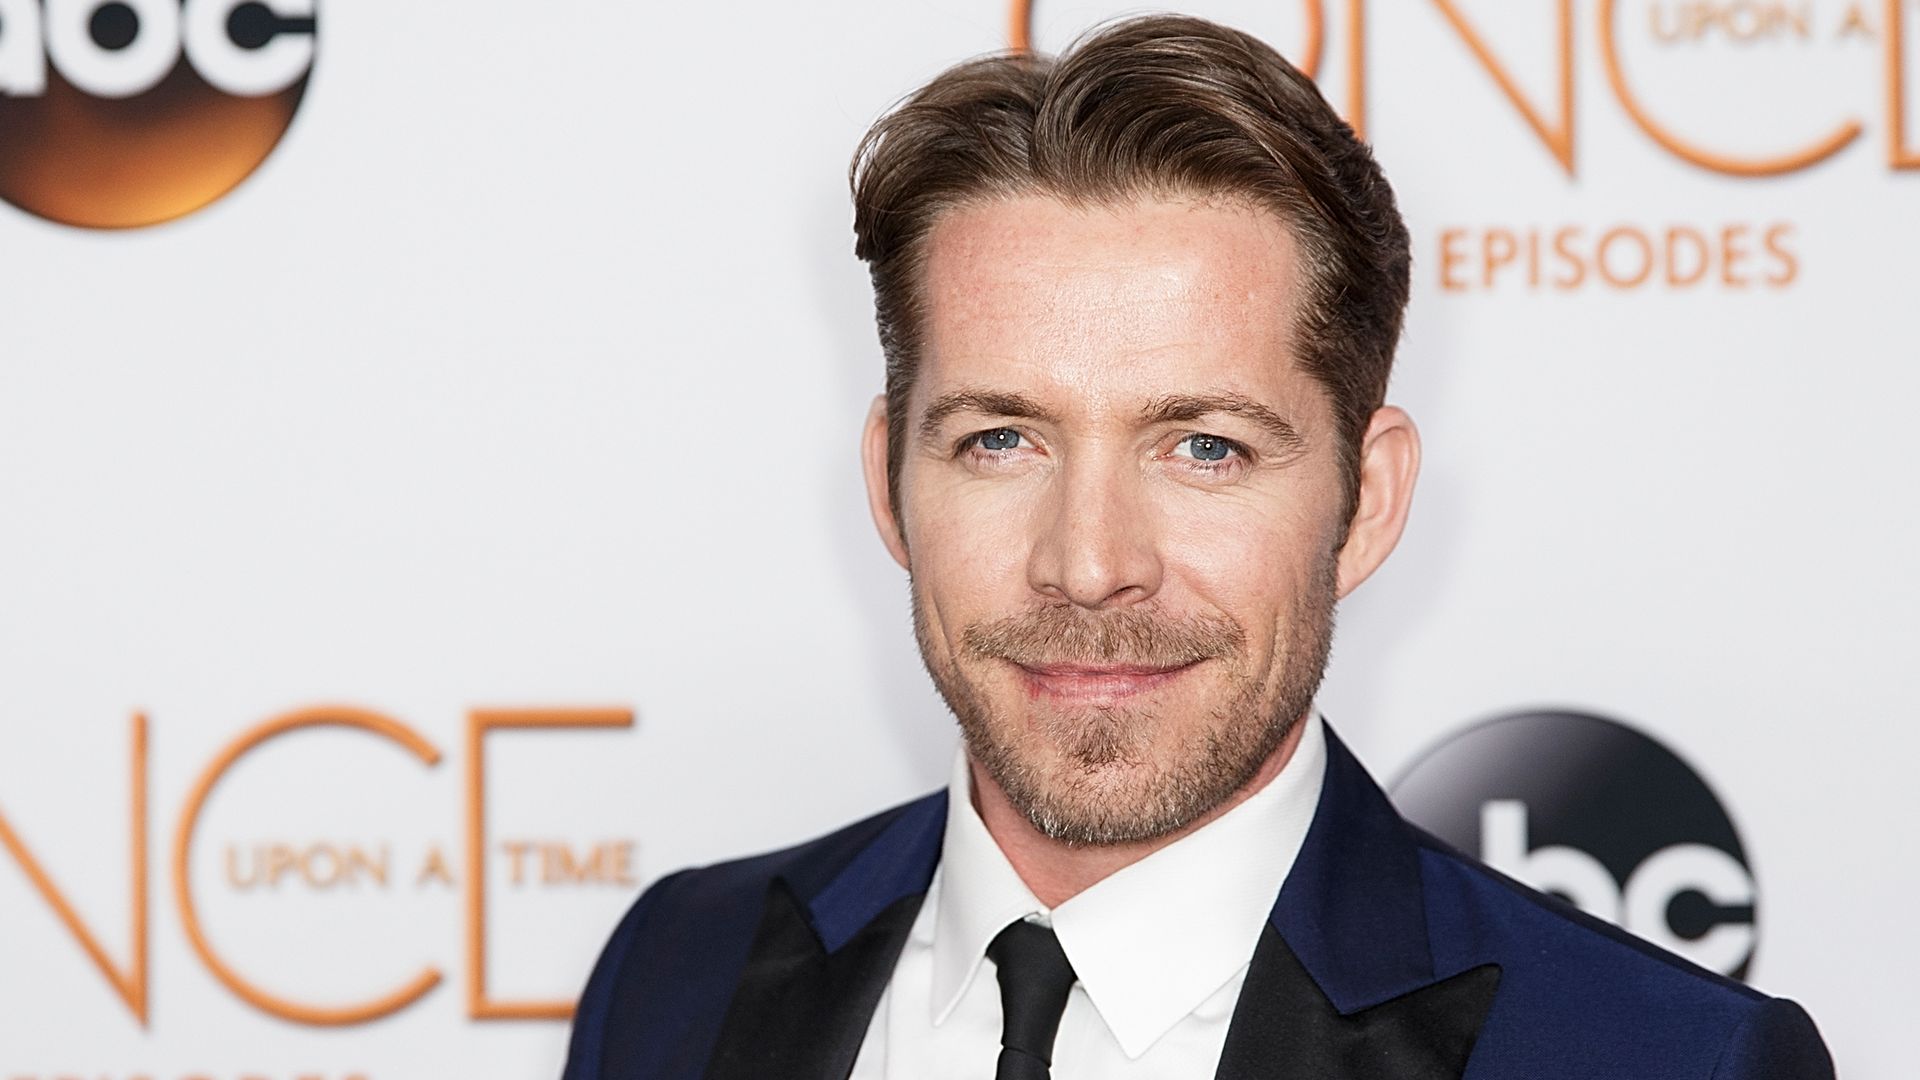 Sean Maguire attends the 100th episode celebration of "Once Upon A Time" at Storybrooke Cannery on February 20, 2016